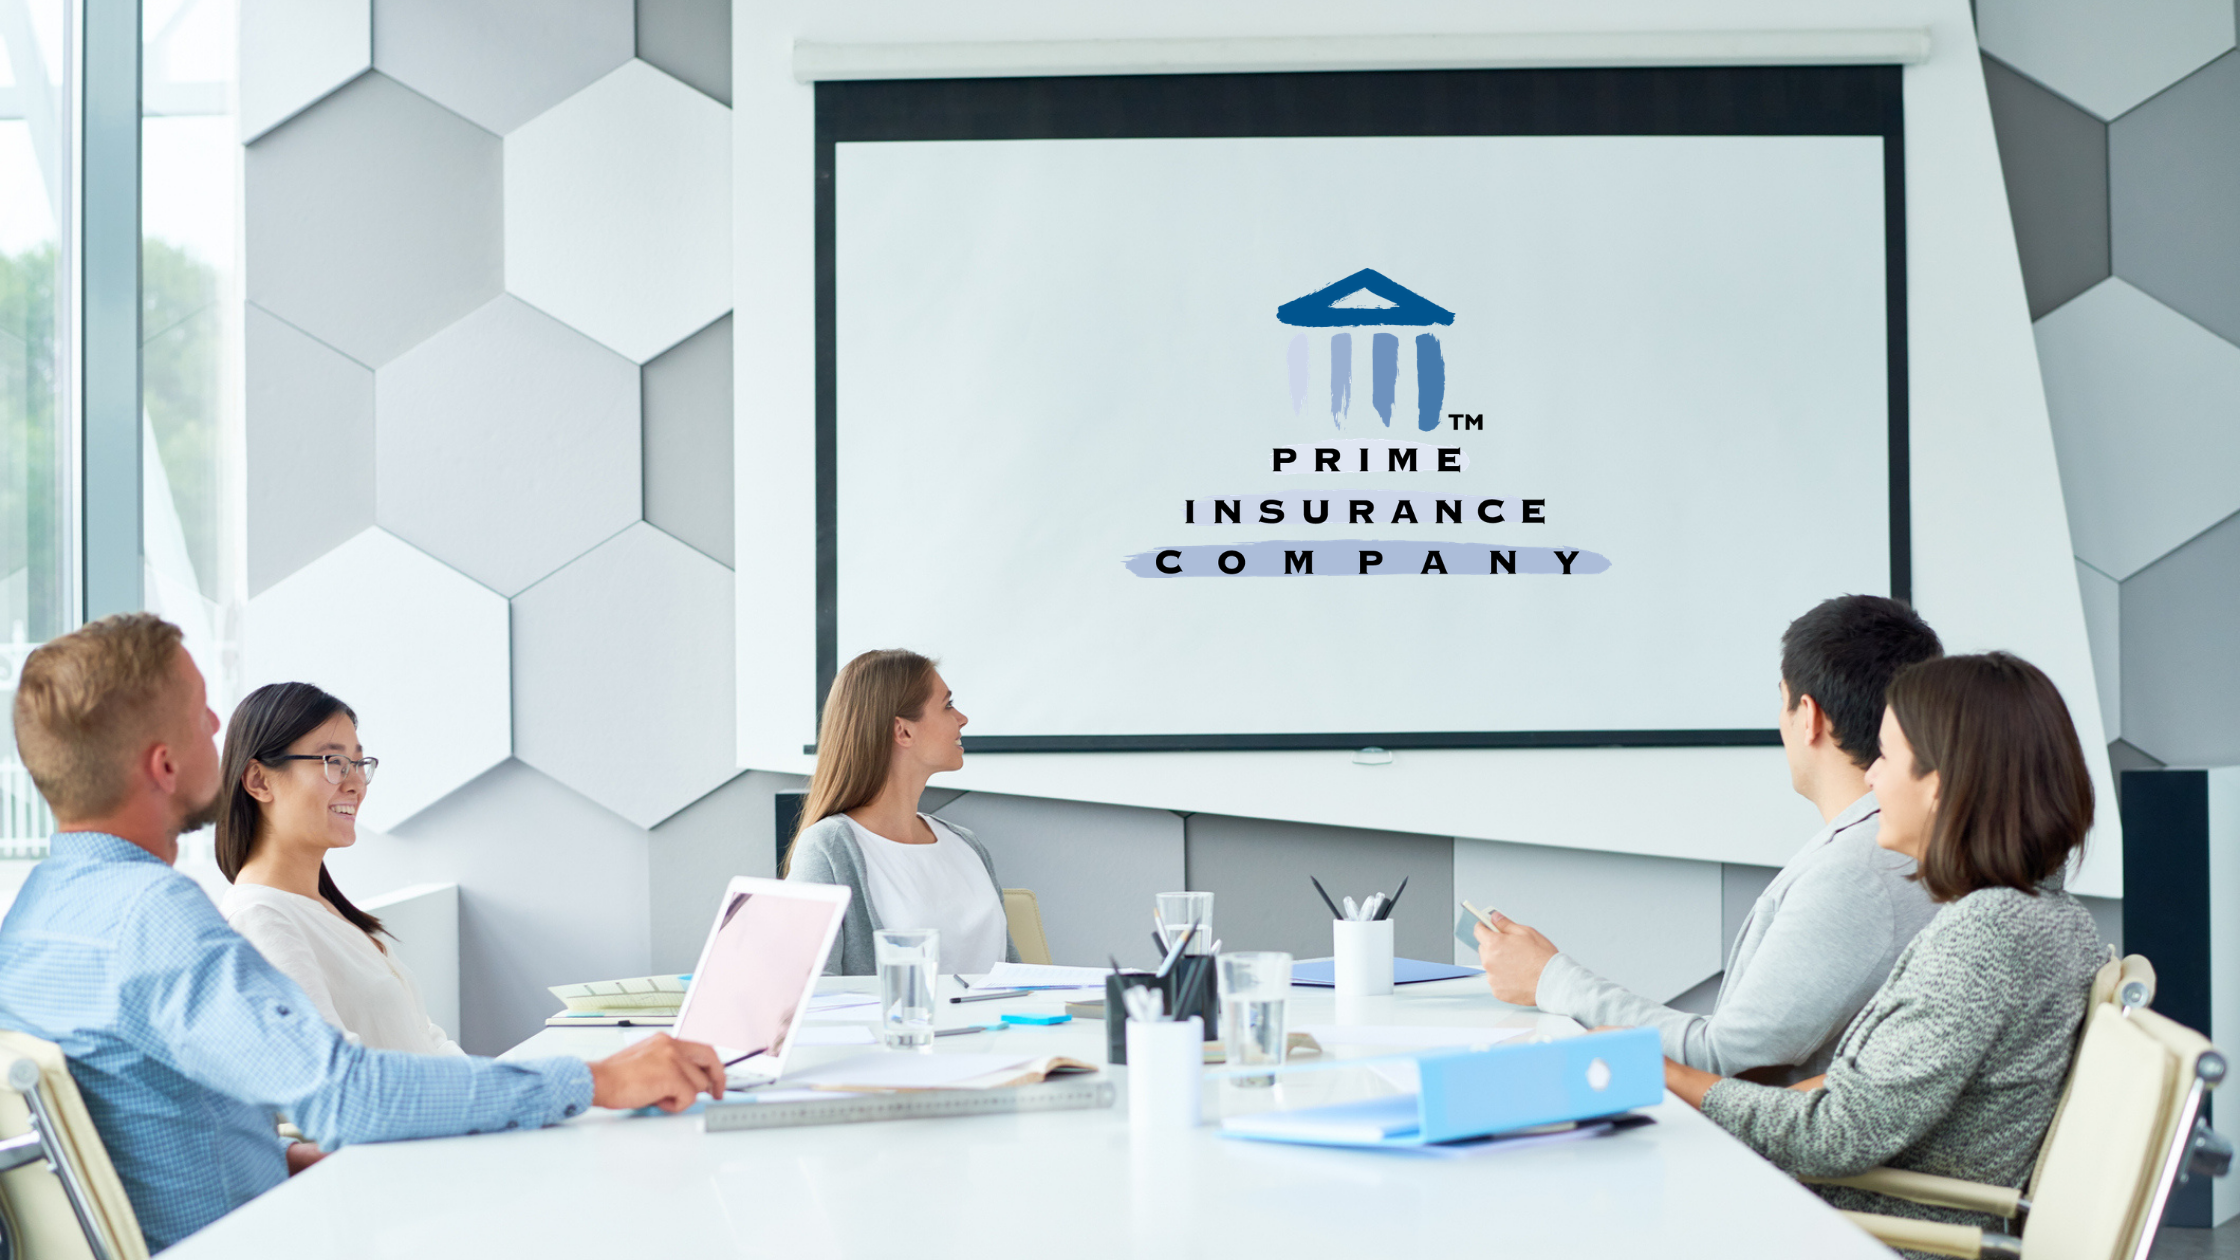 About Prime Insurance Company